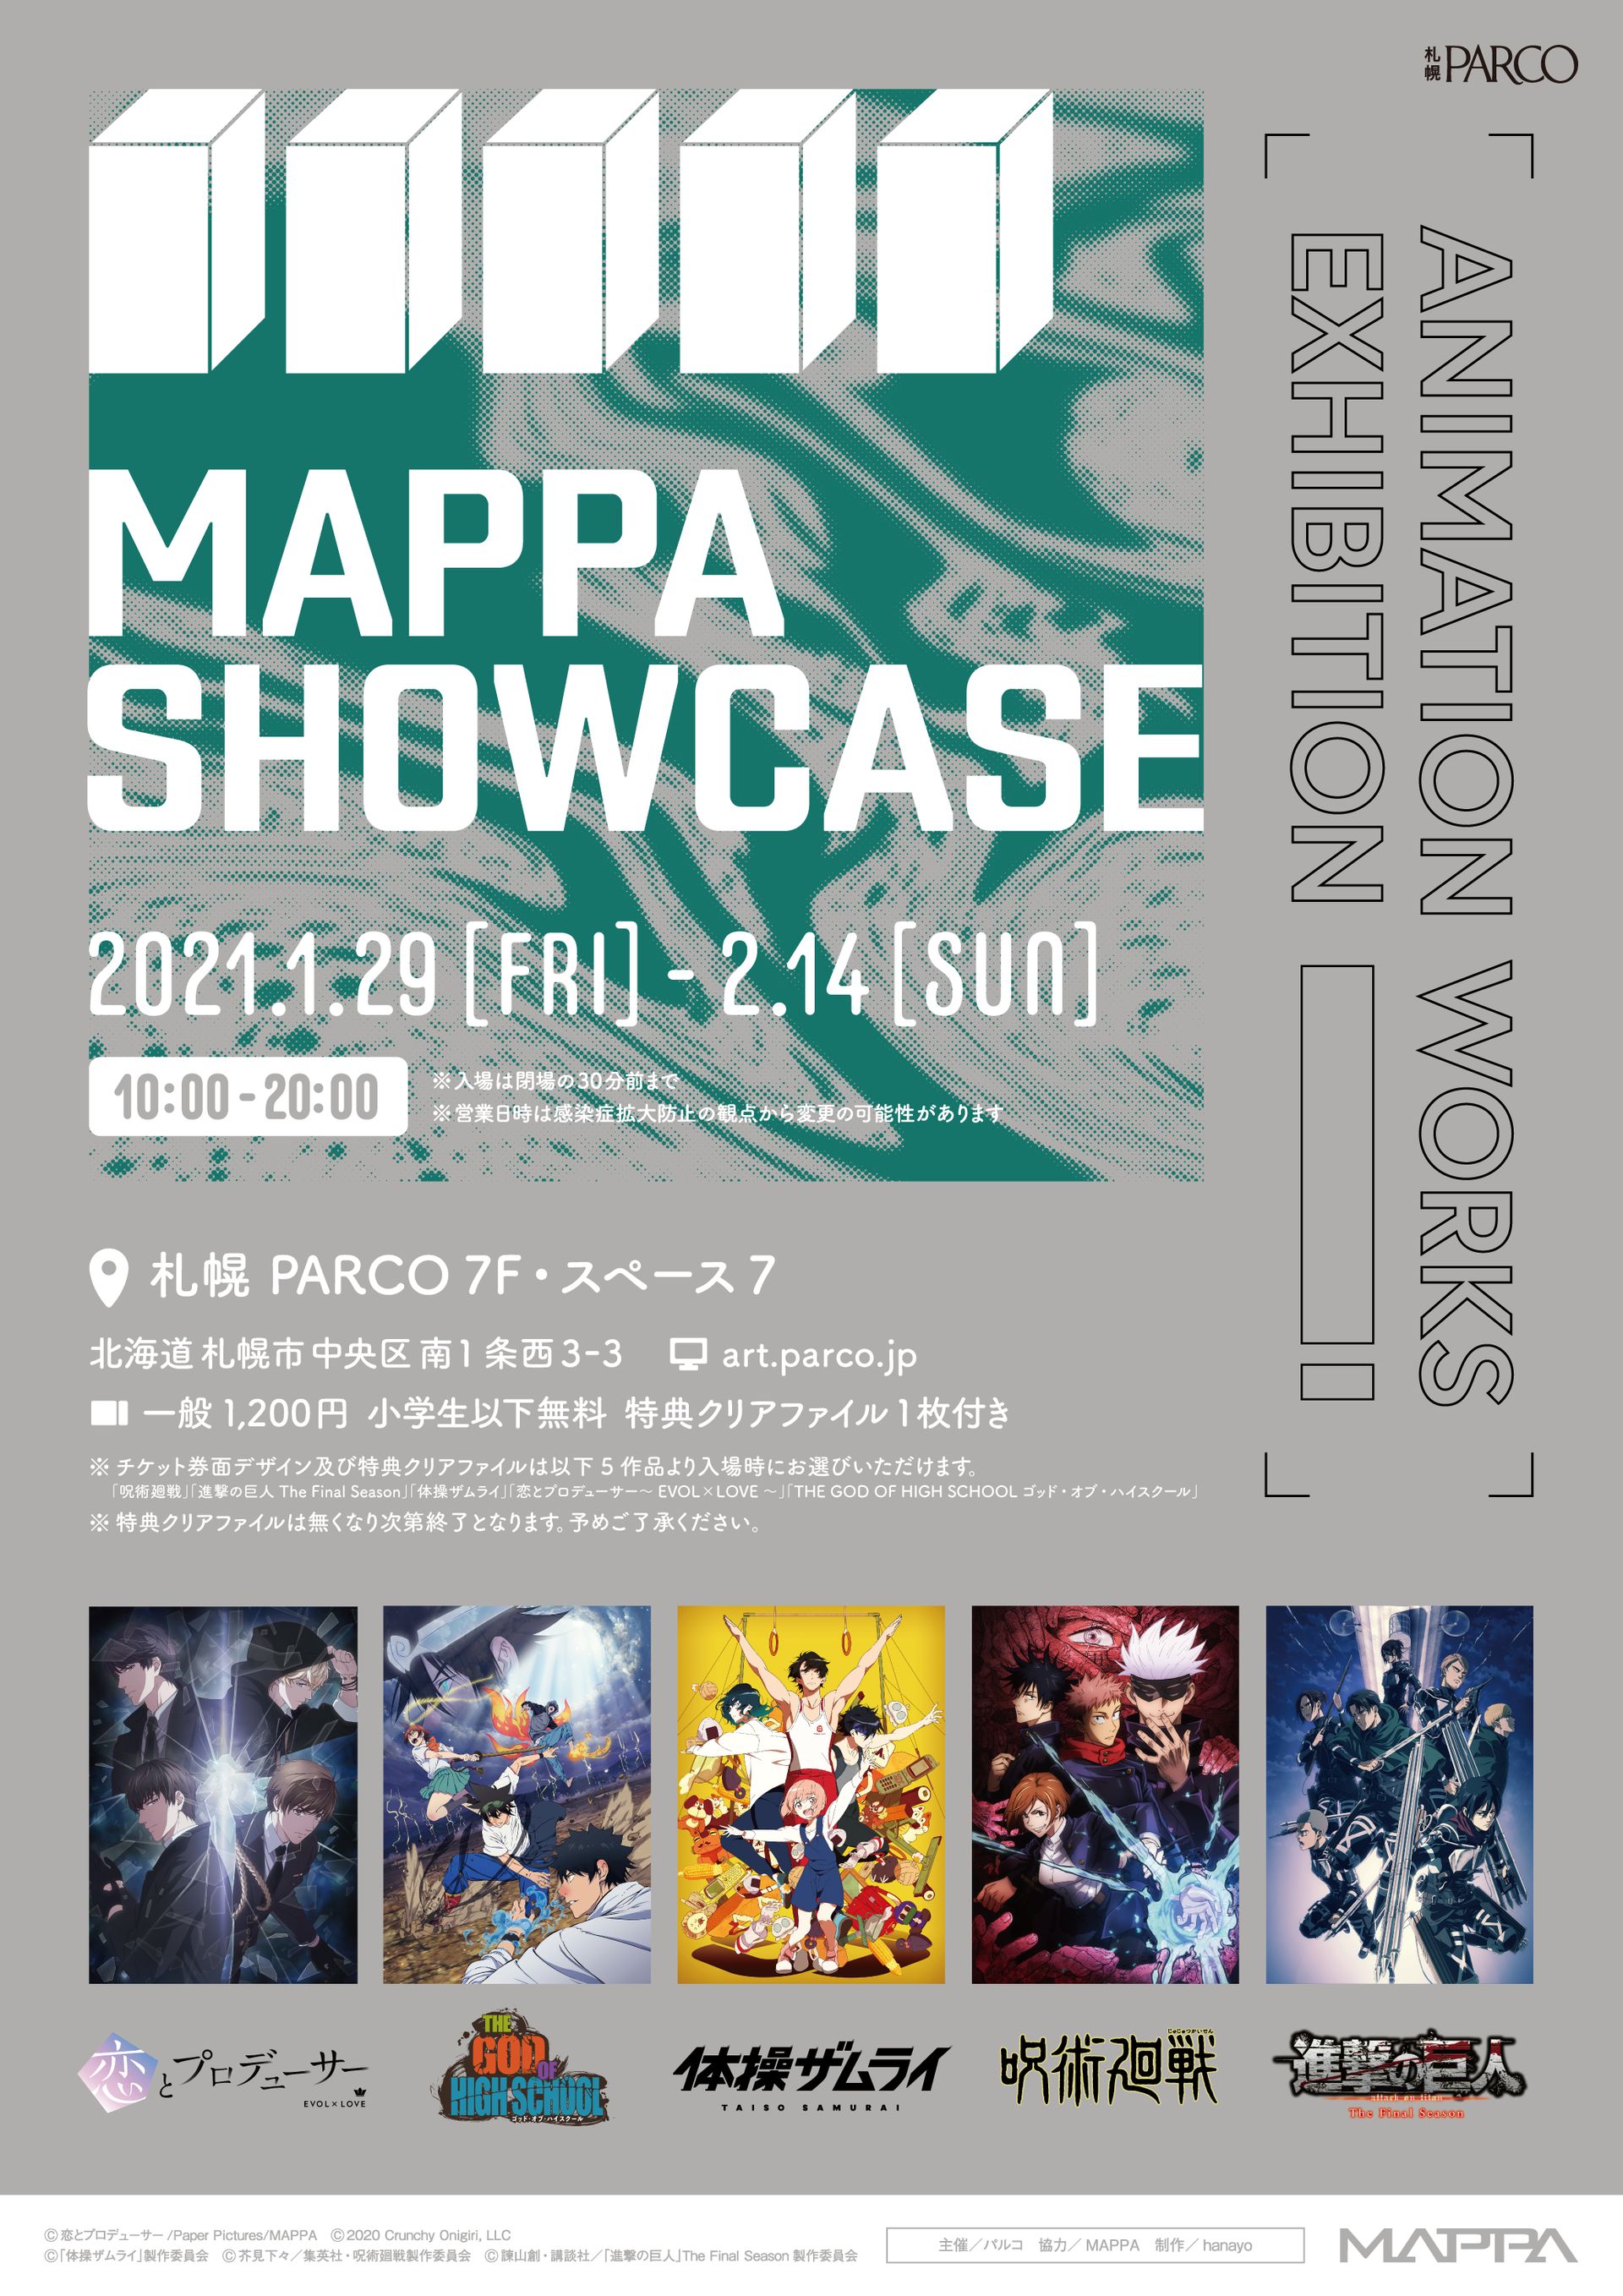 Mappa Showcase In 札幌 開催が決定 Tvアニメ 呪術廻戦 進撃の巨人 など5作品の原画や設定資料を展示 Game Watch